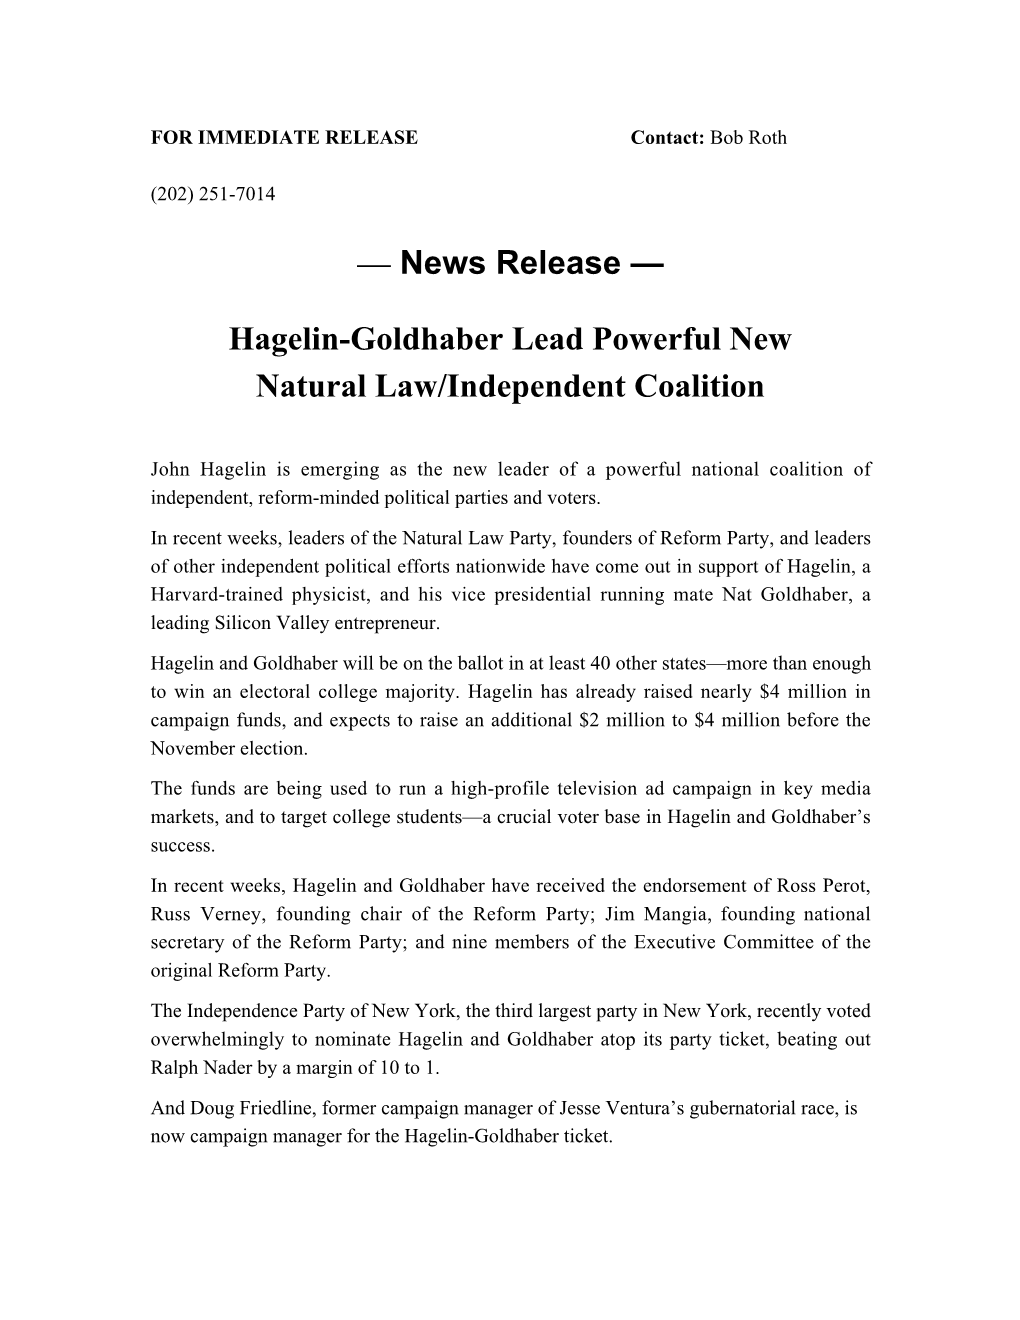 News Release — Hagelin-Goldhaber Lead Powerful New Natural Law